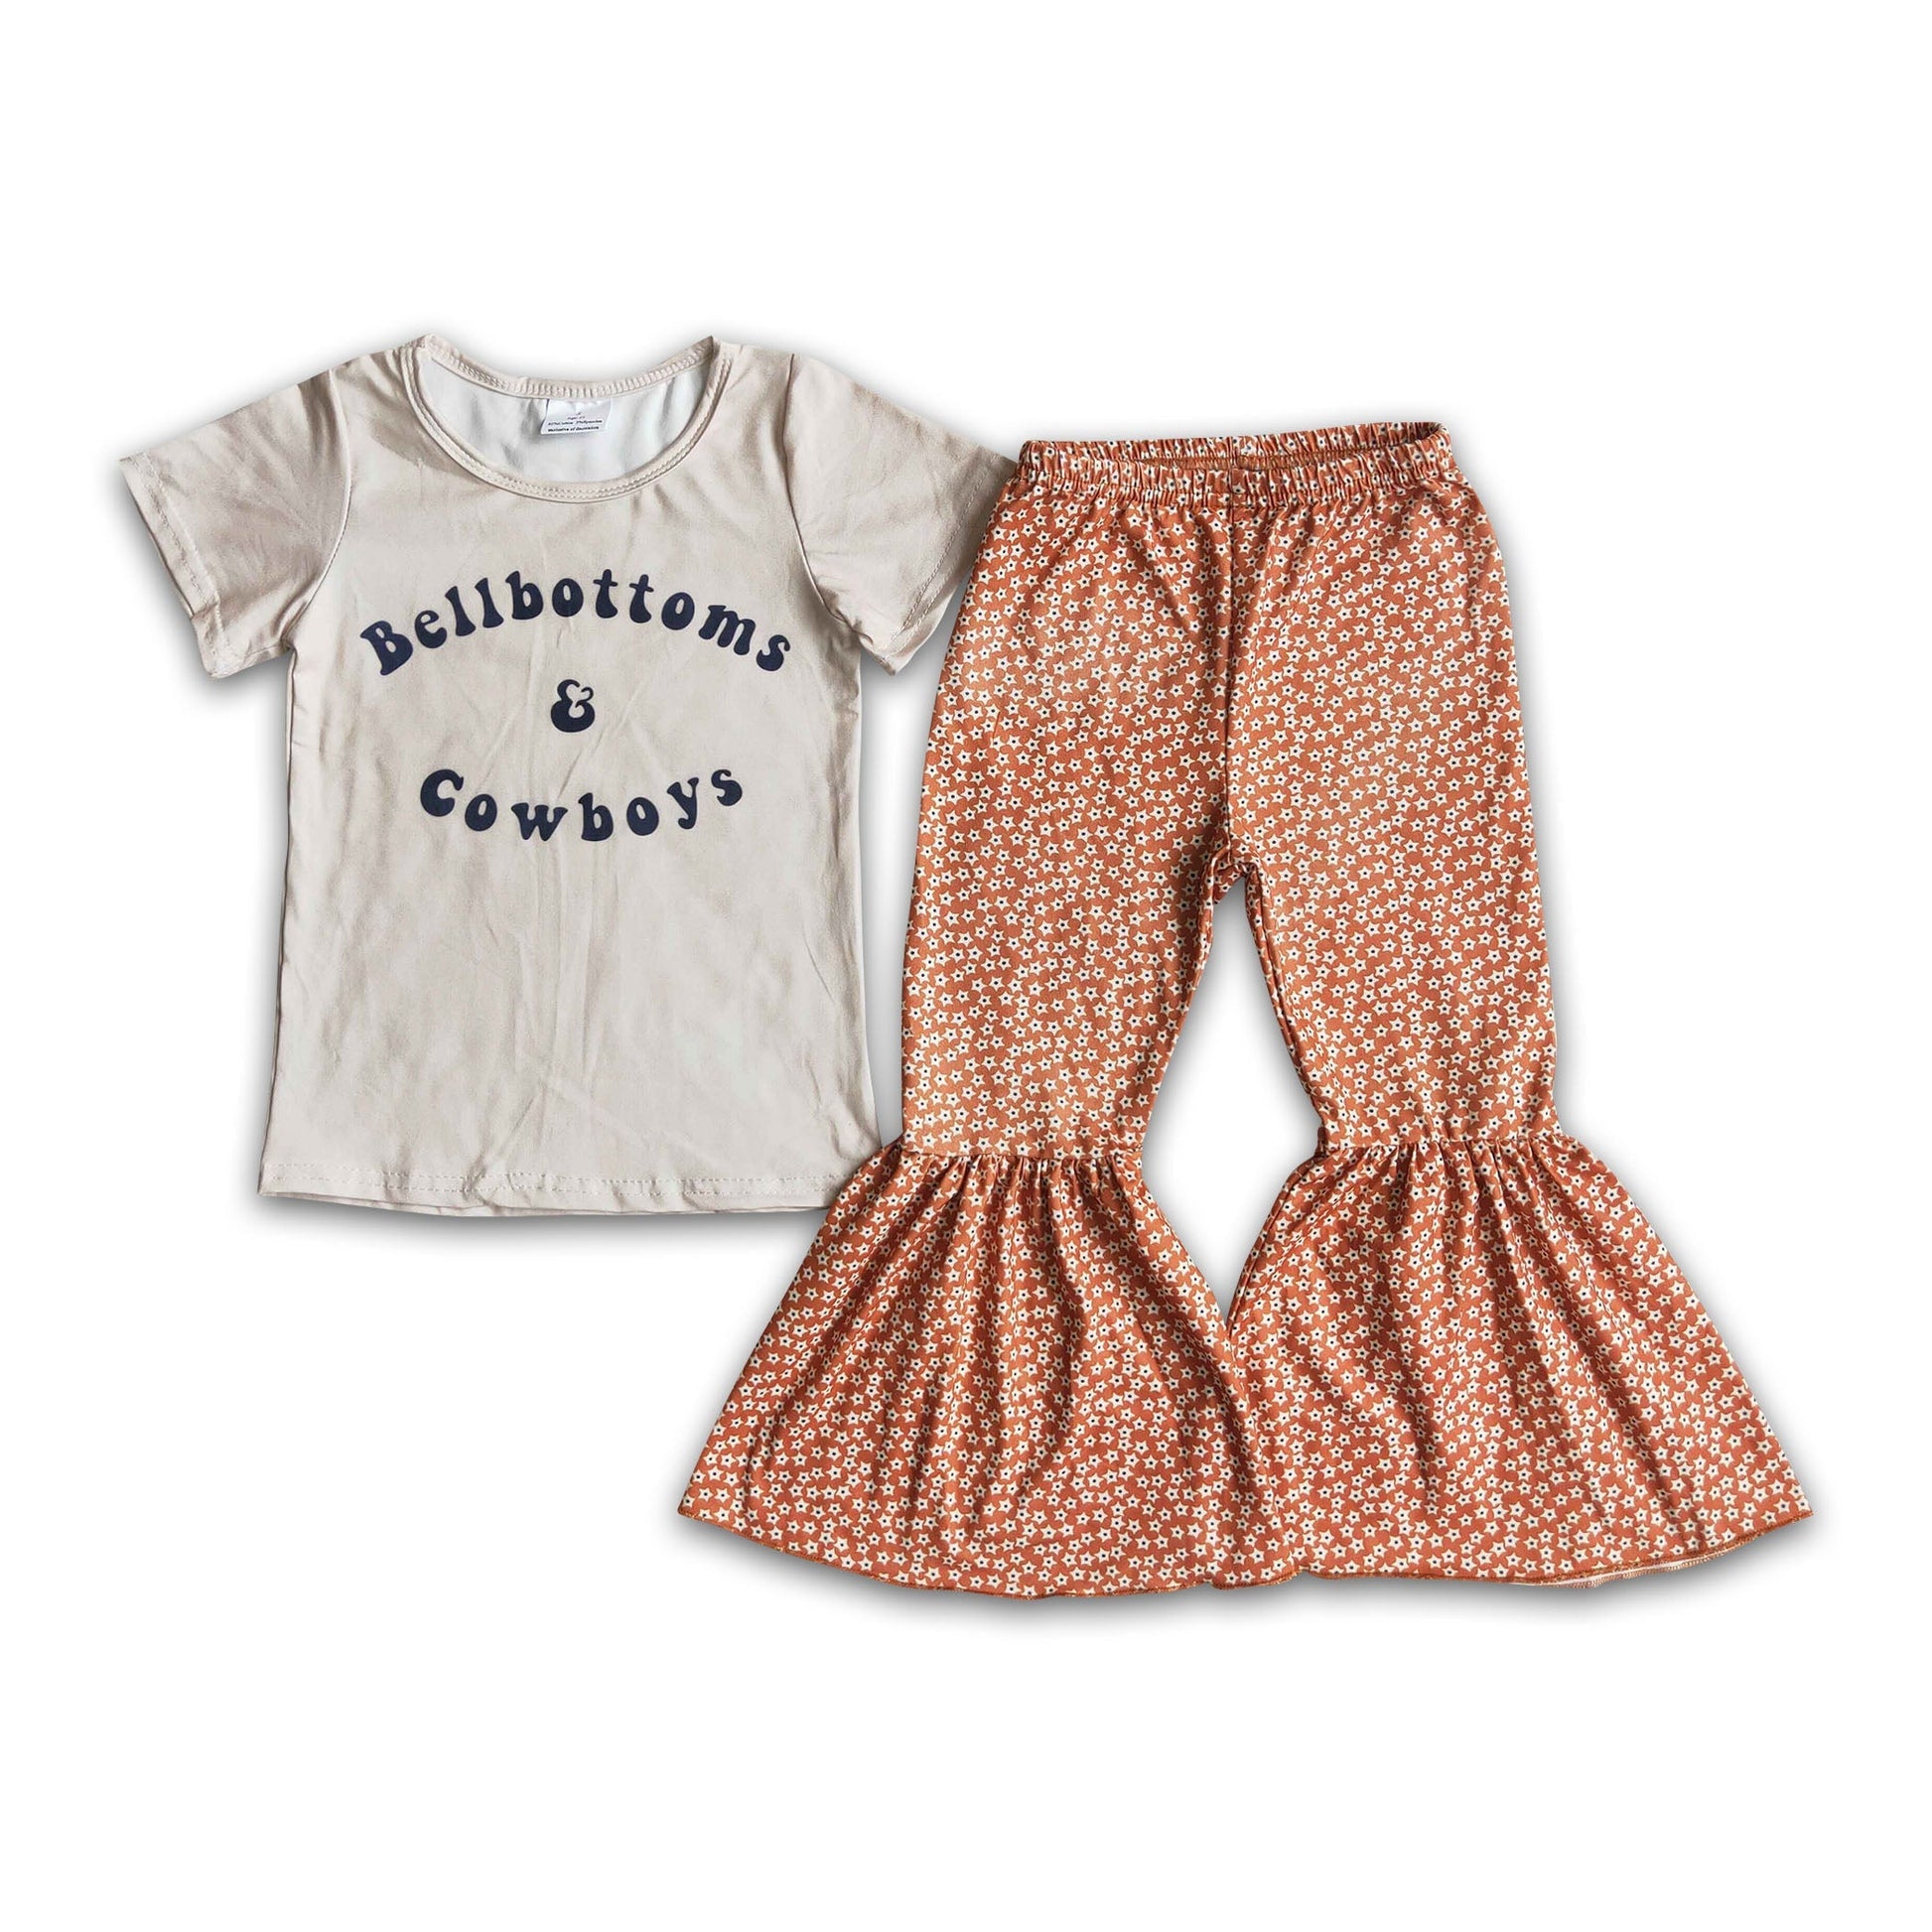 Bell bottoms and cowboys girls outfits – Yawoo Garments